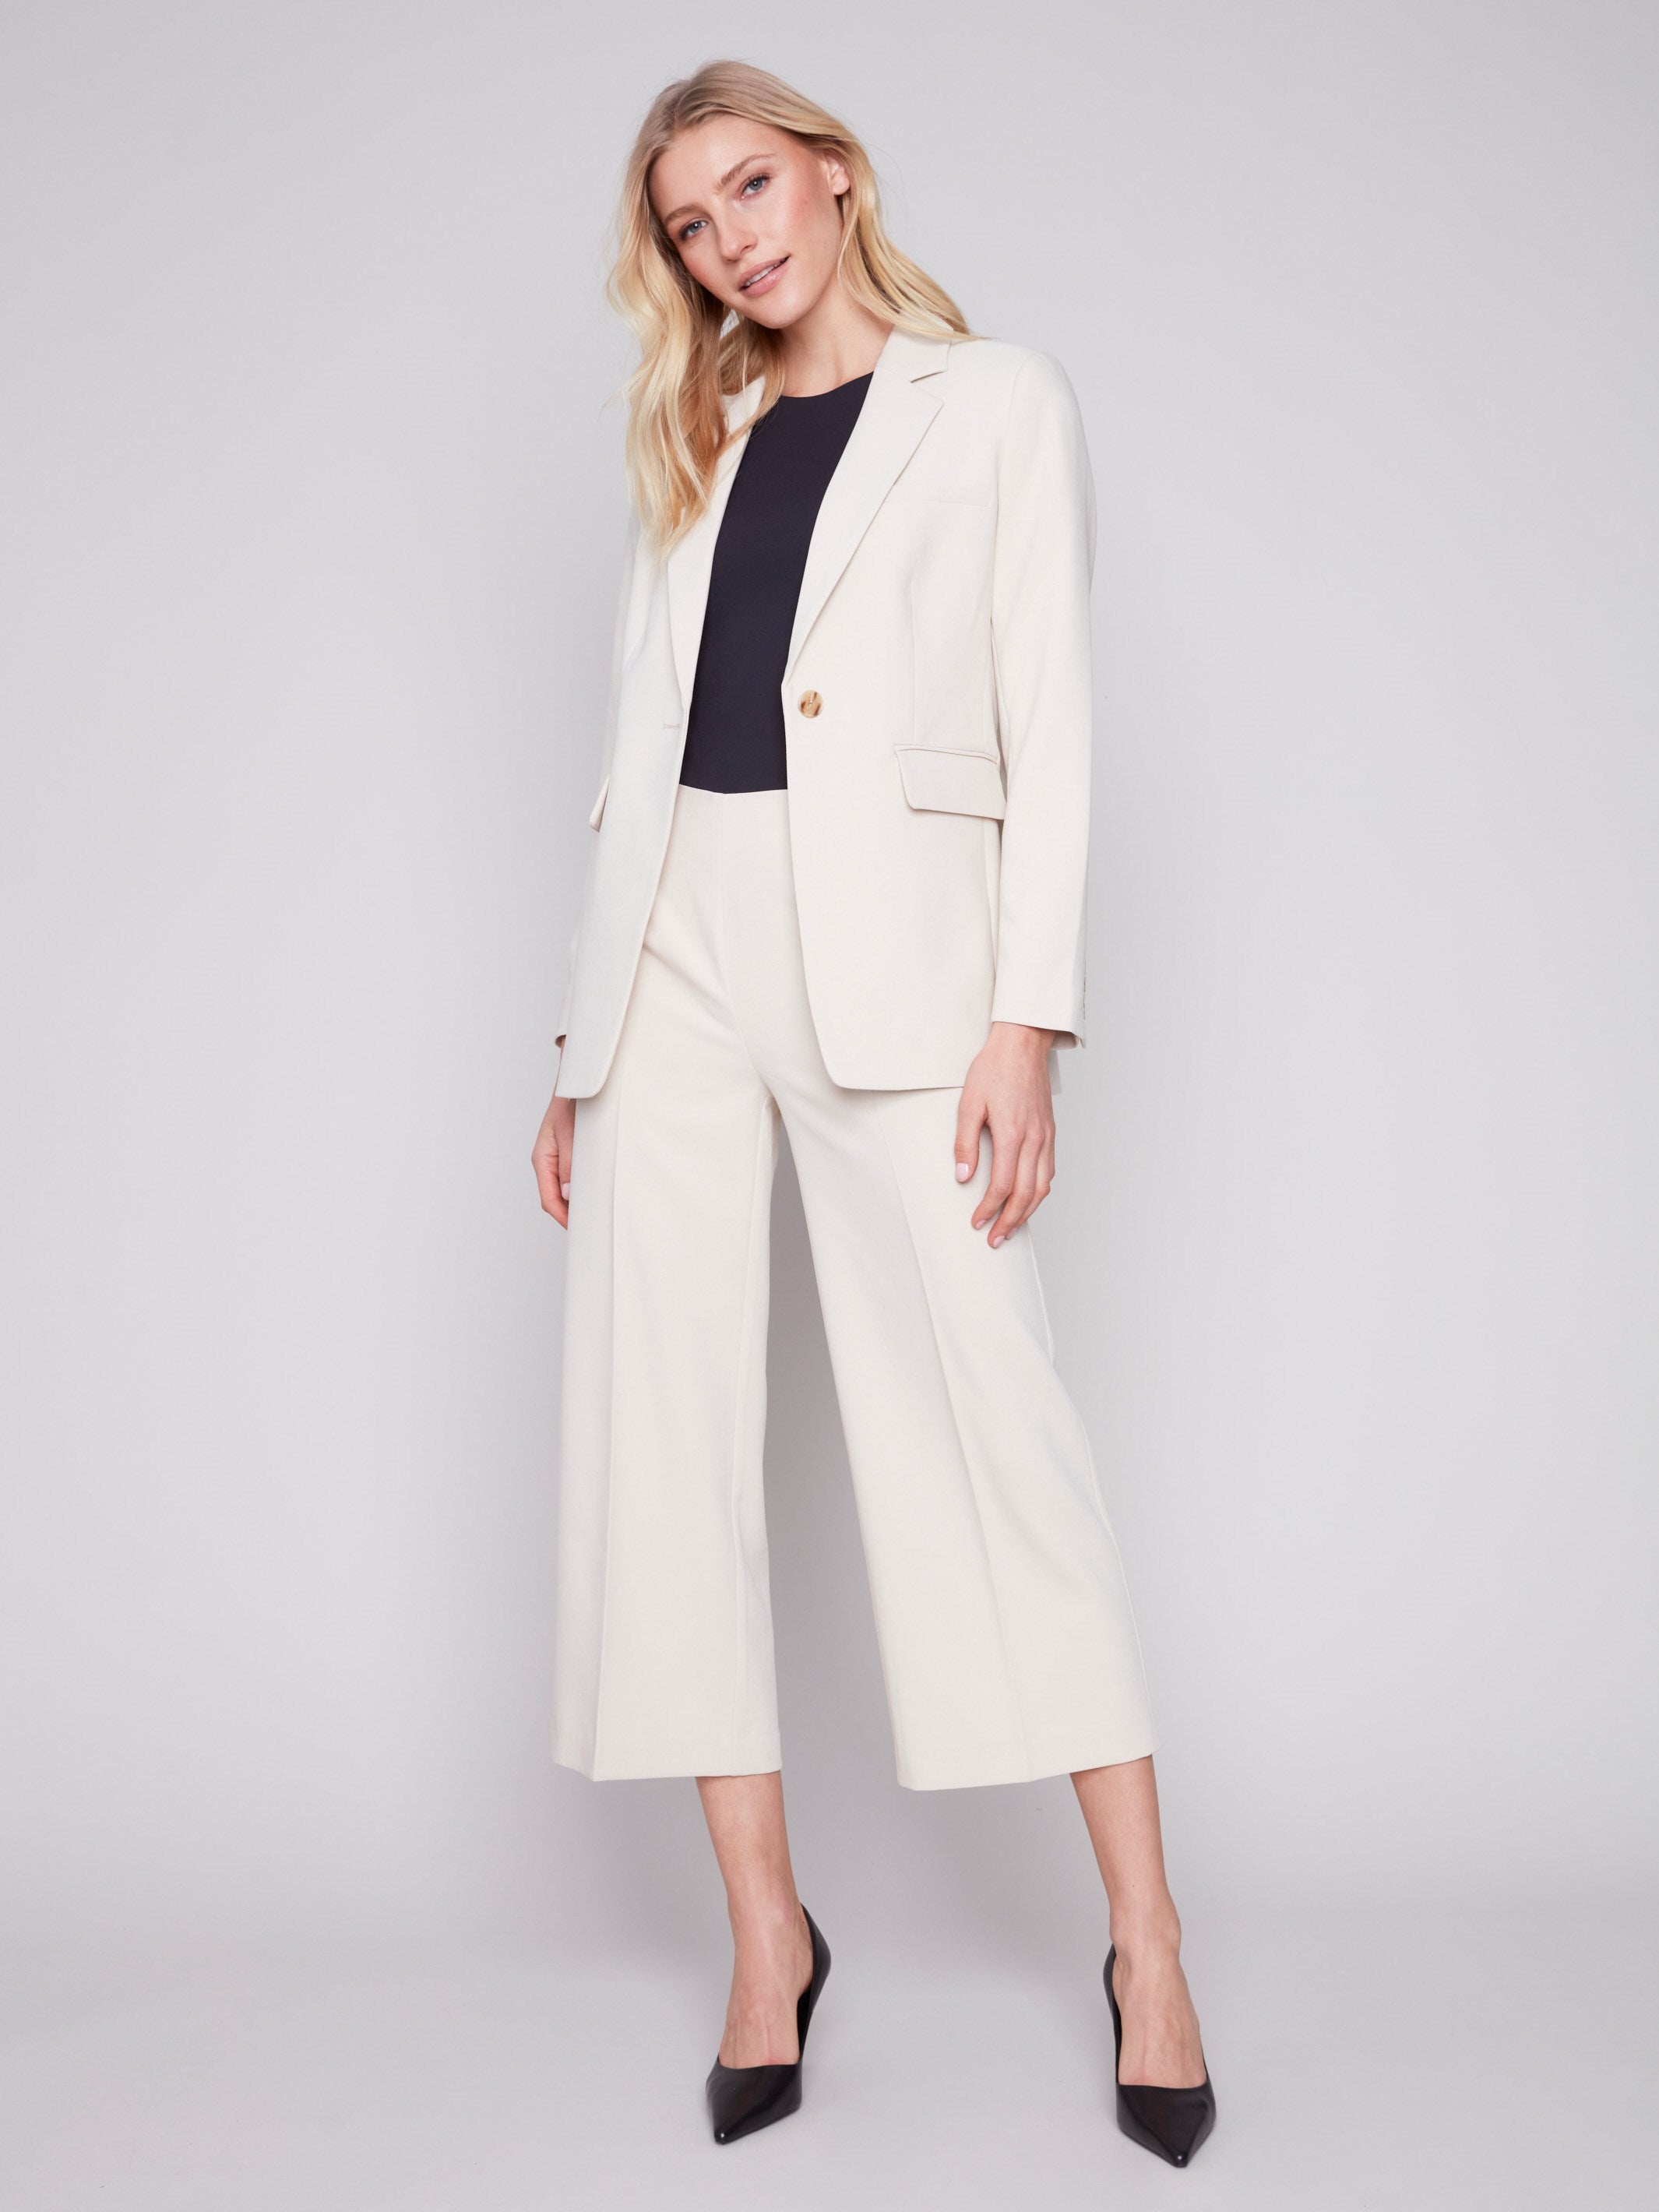 Blazer with Ruched Back - Beige - Charlie B Collection Canada - Image 2